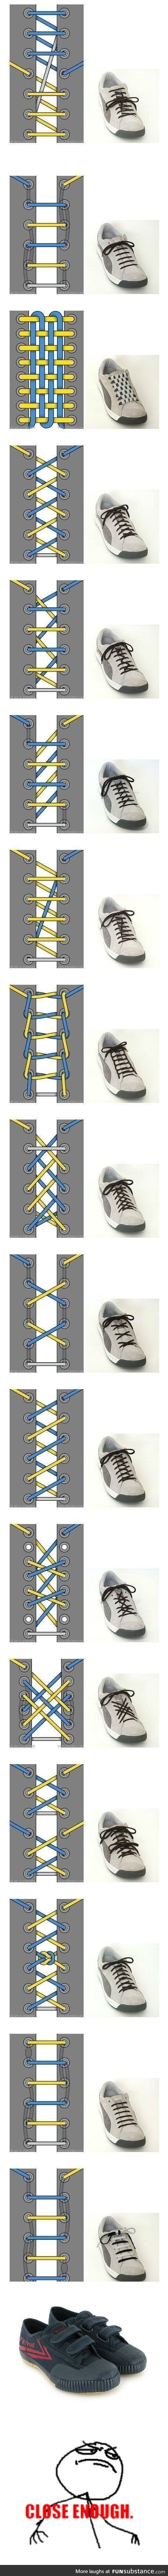 Cool ways to tie your shoes